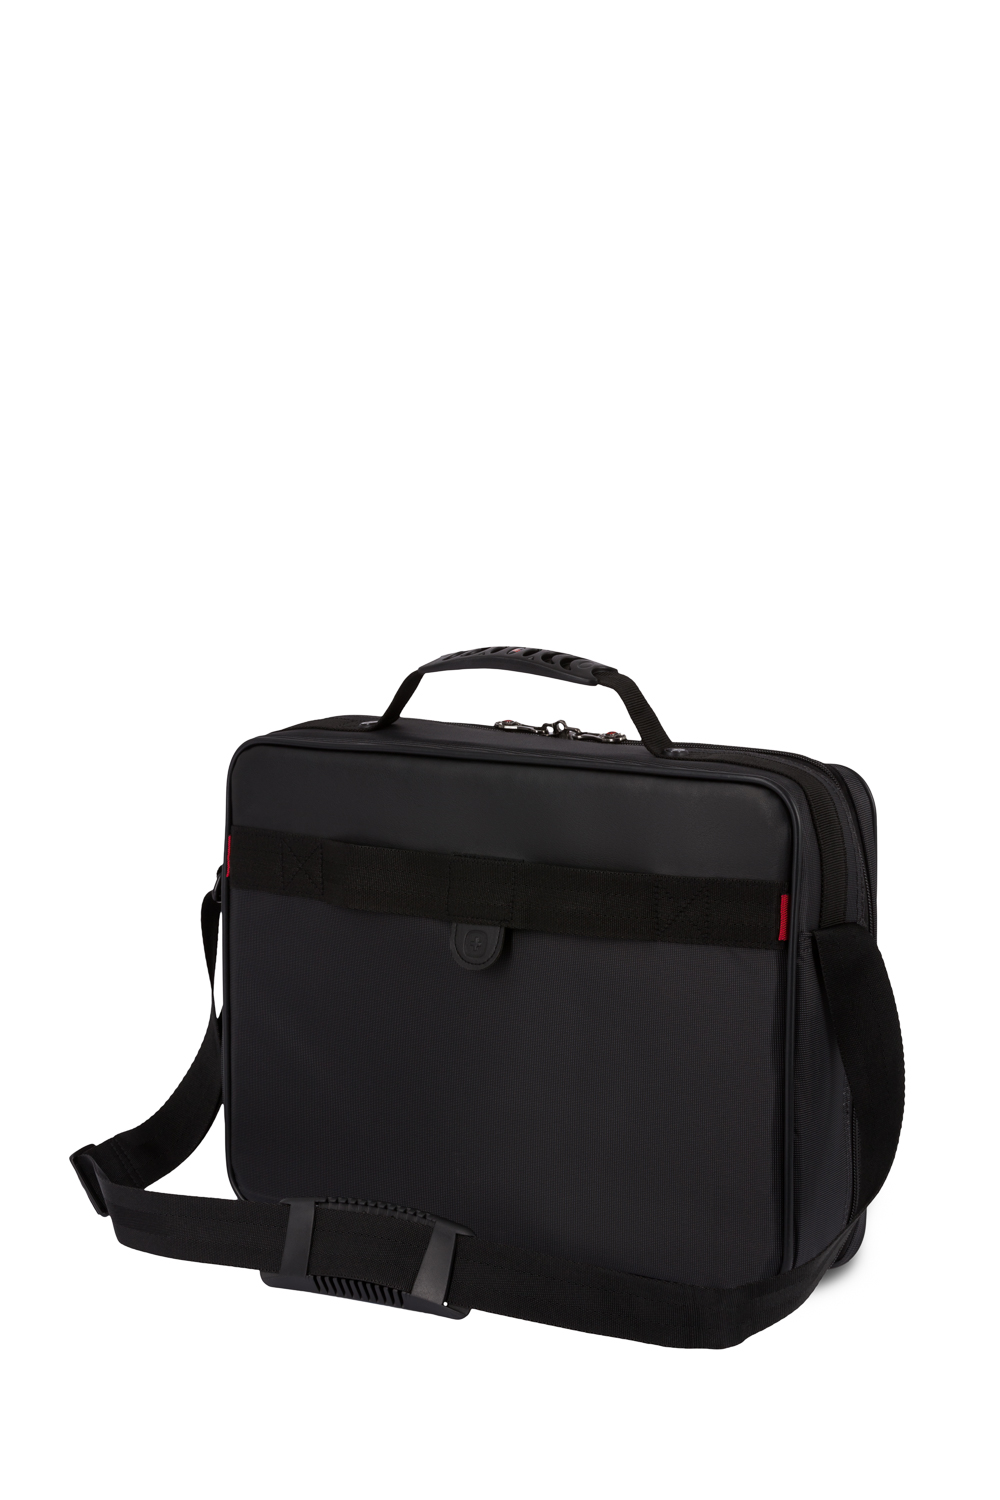 Wenger Insight 16 inch Single Gusset Computer Case - Black